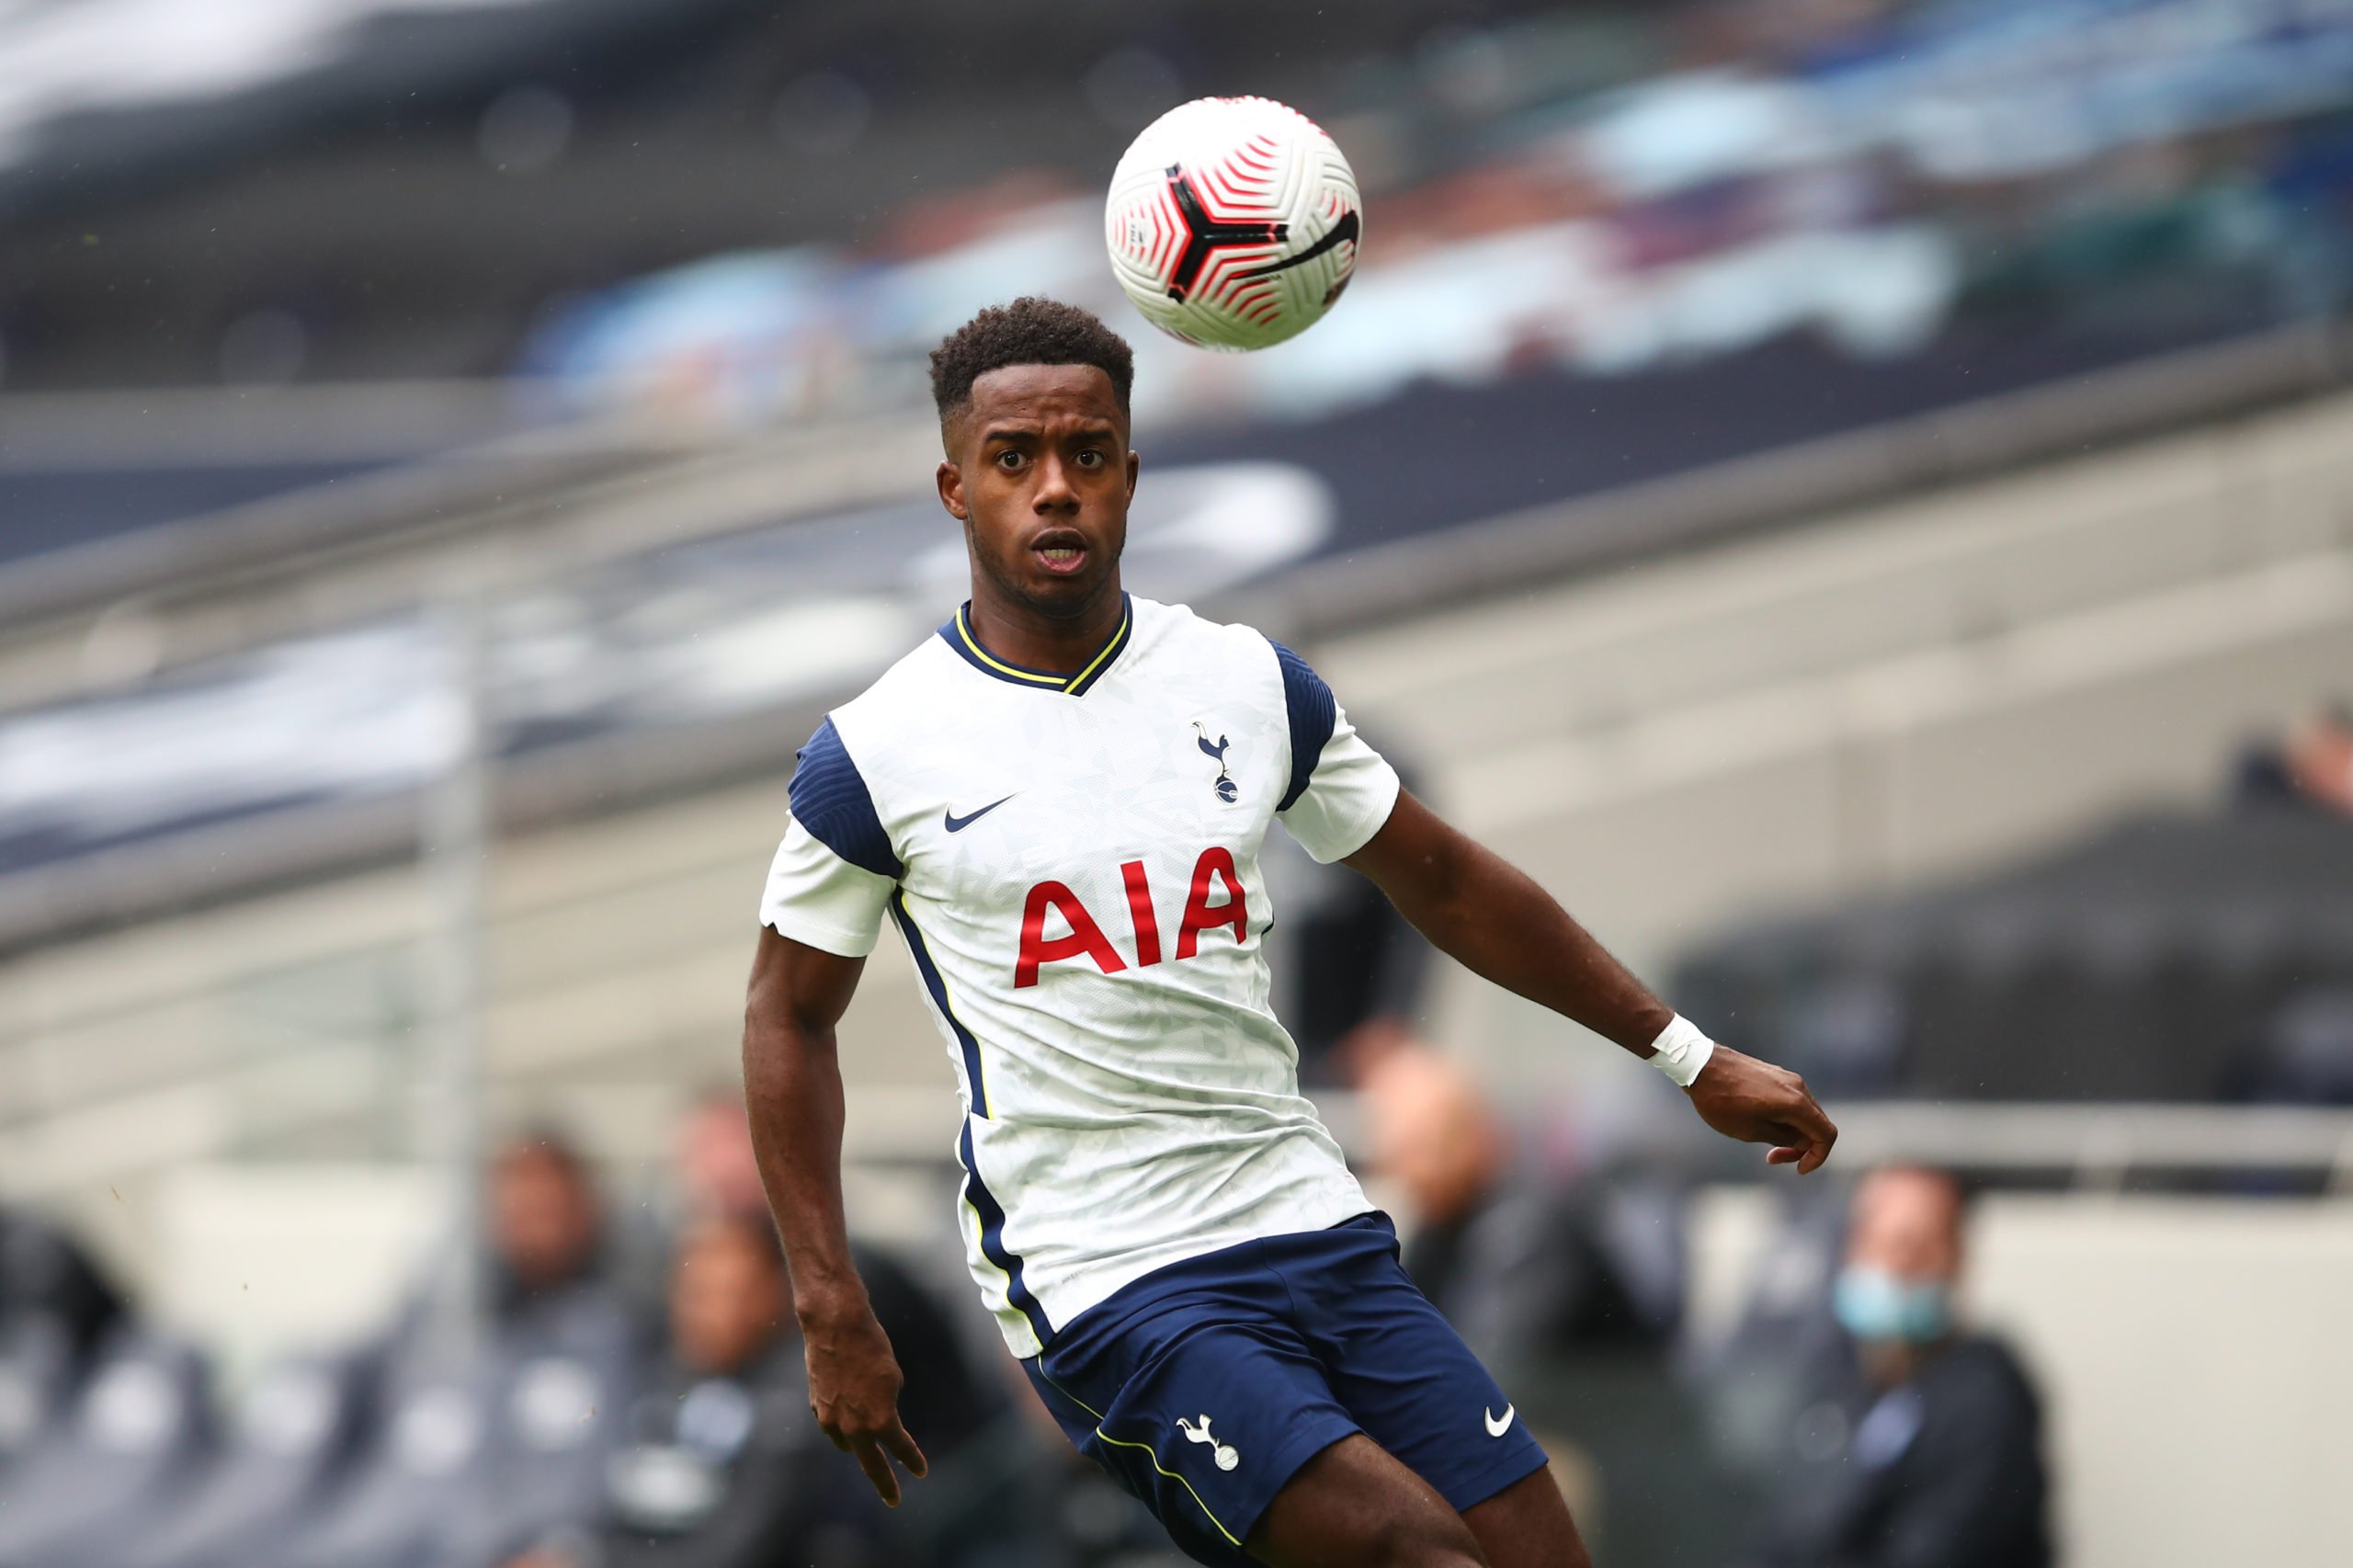 Ryan Sessegnon of Tottenham Hotspur suffered an injury against Liverpool. (Photo by Marc Atkins/Getty Images))